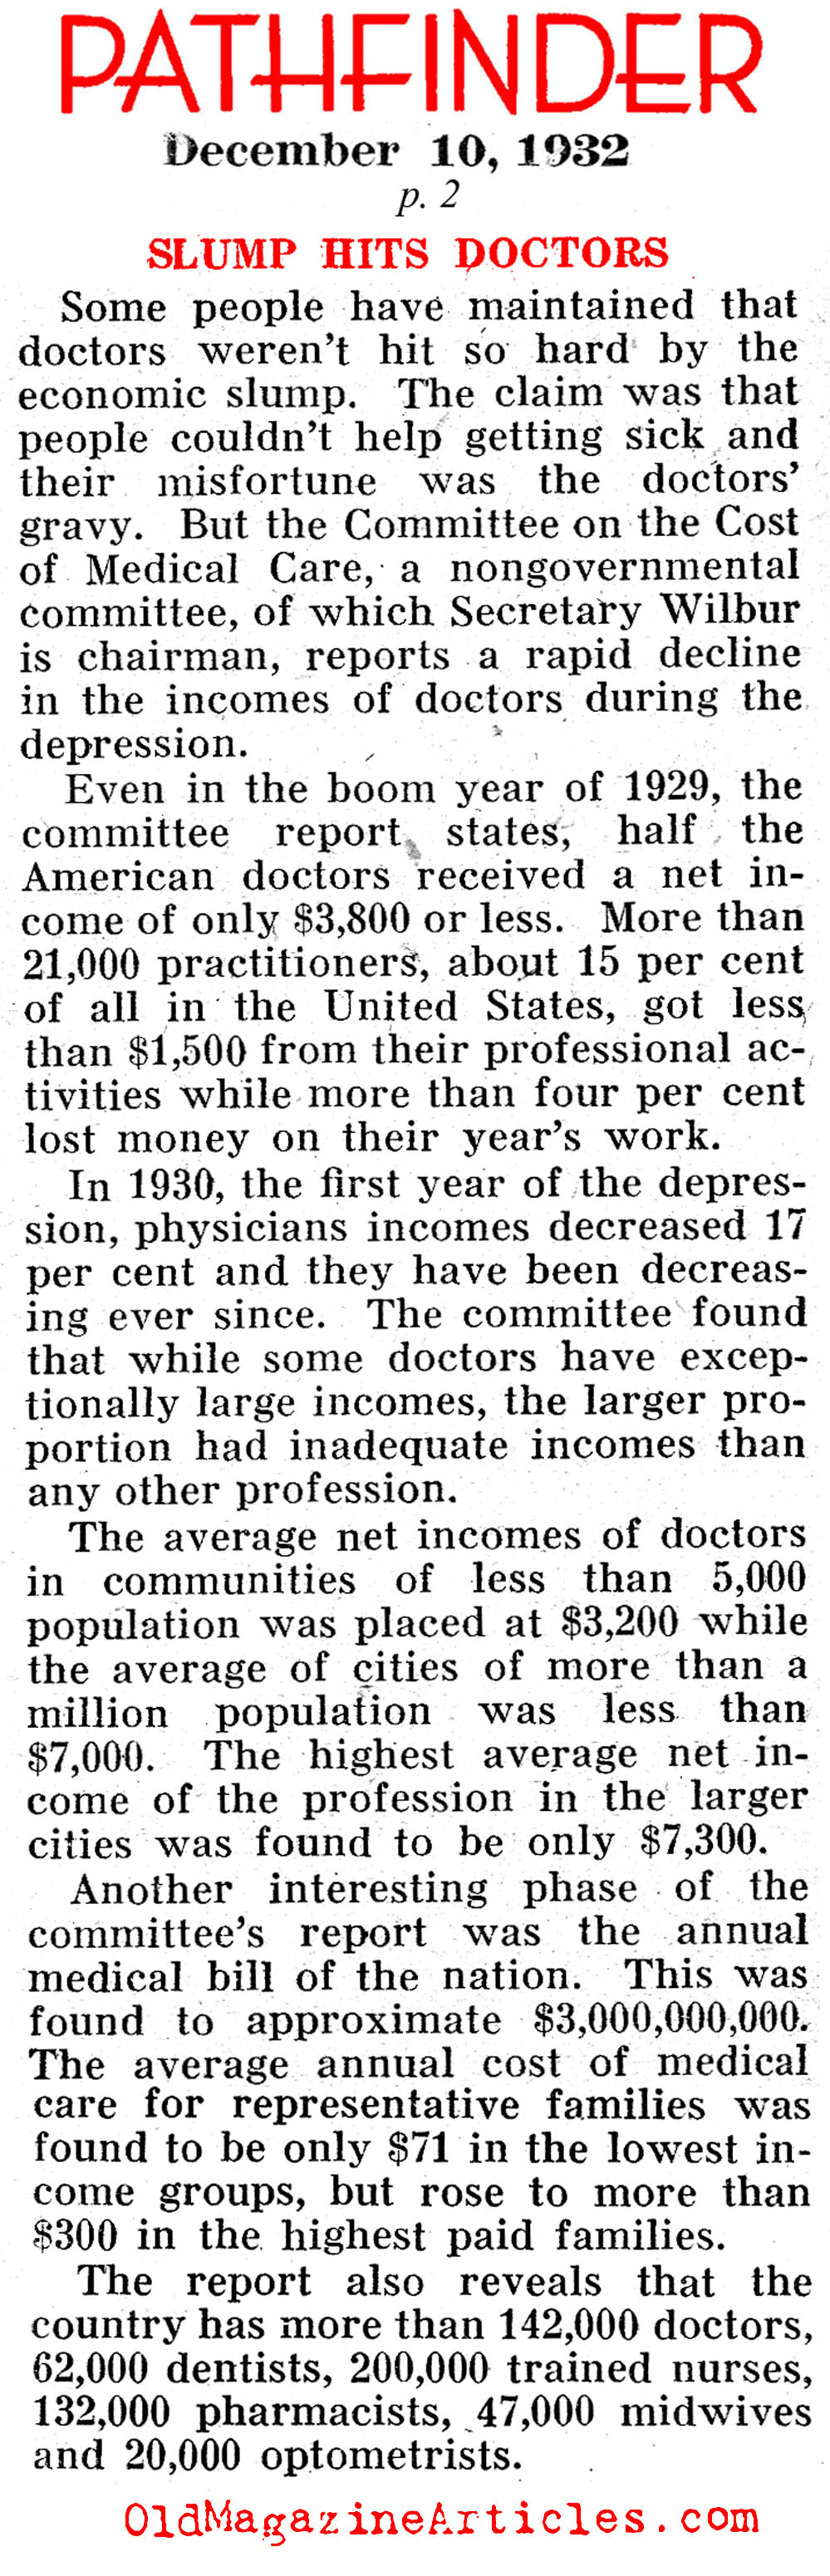 When the Depression Caught Up With Doctors (Pathfinder Magazine, 1932)